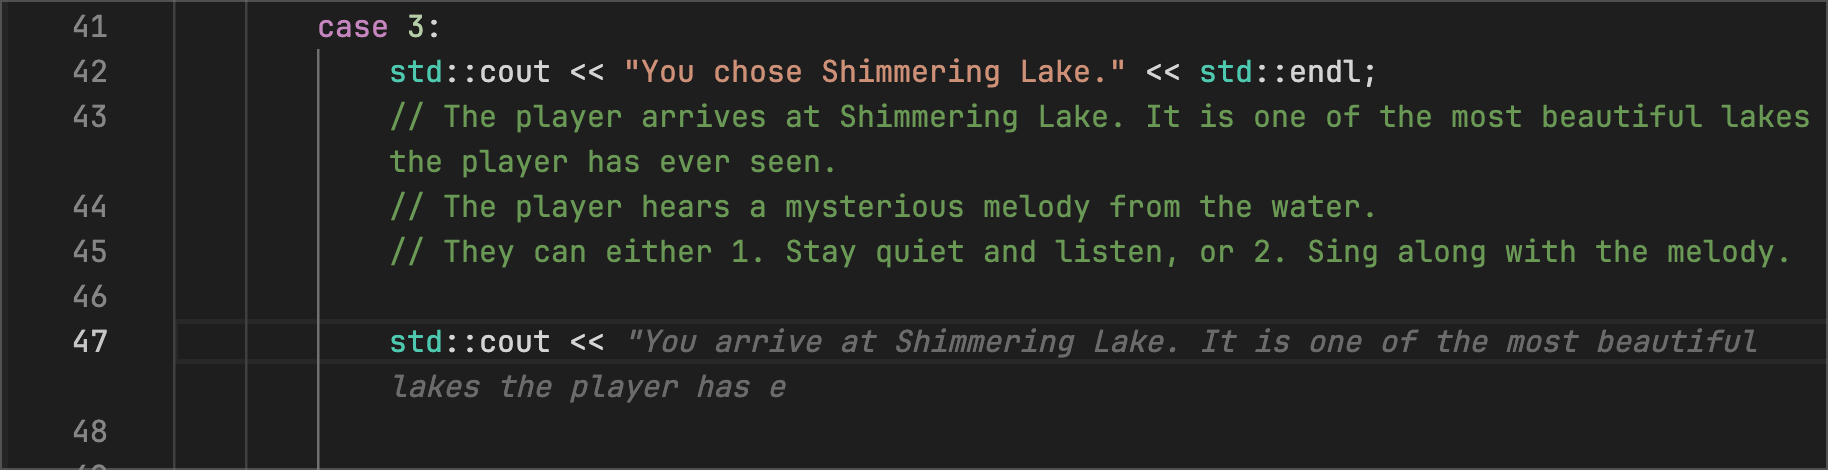 adventure.cpp - Code Suggestions helps fill out the output code based on the comments about the interaction at the Lake